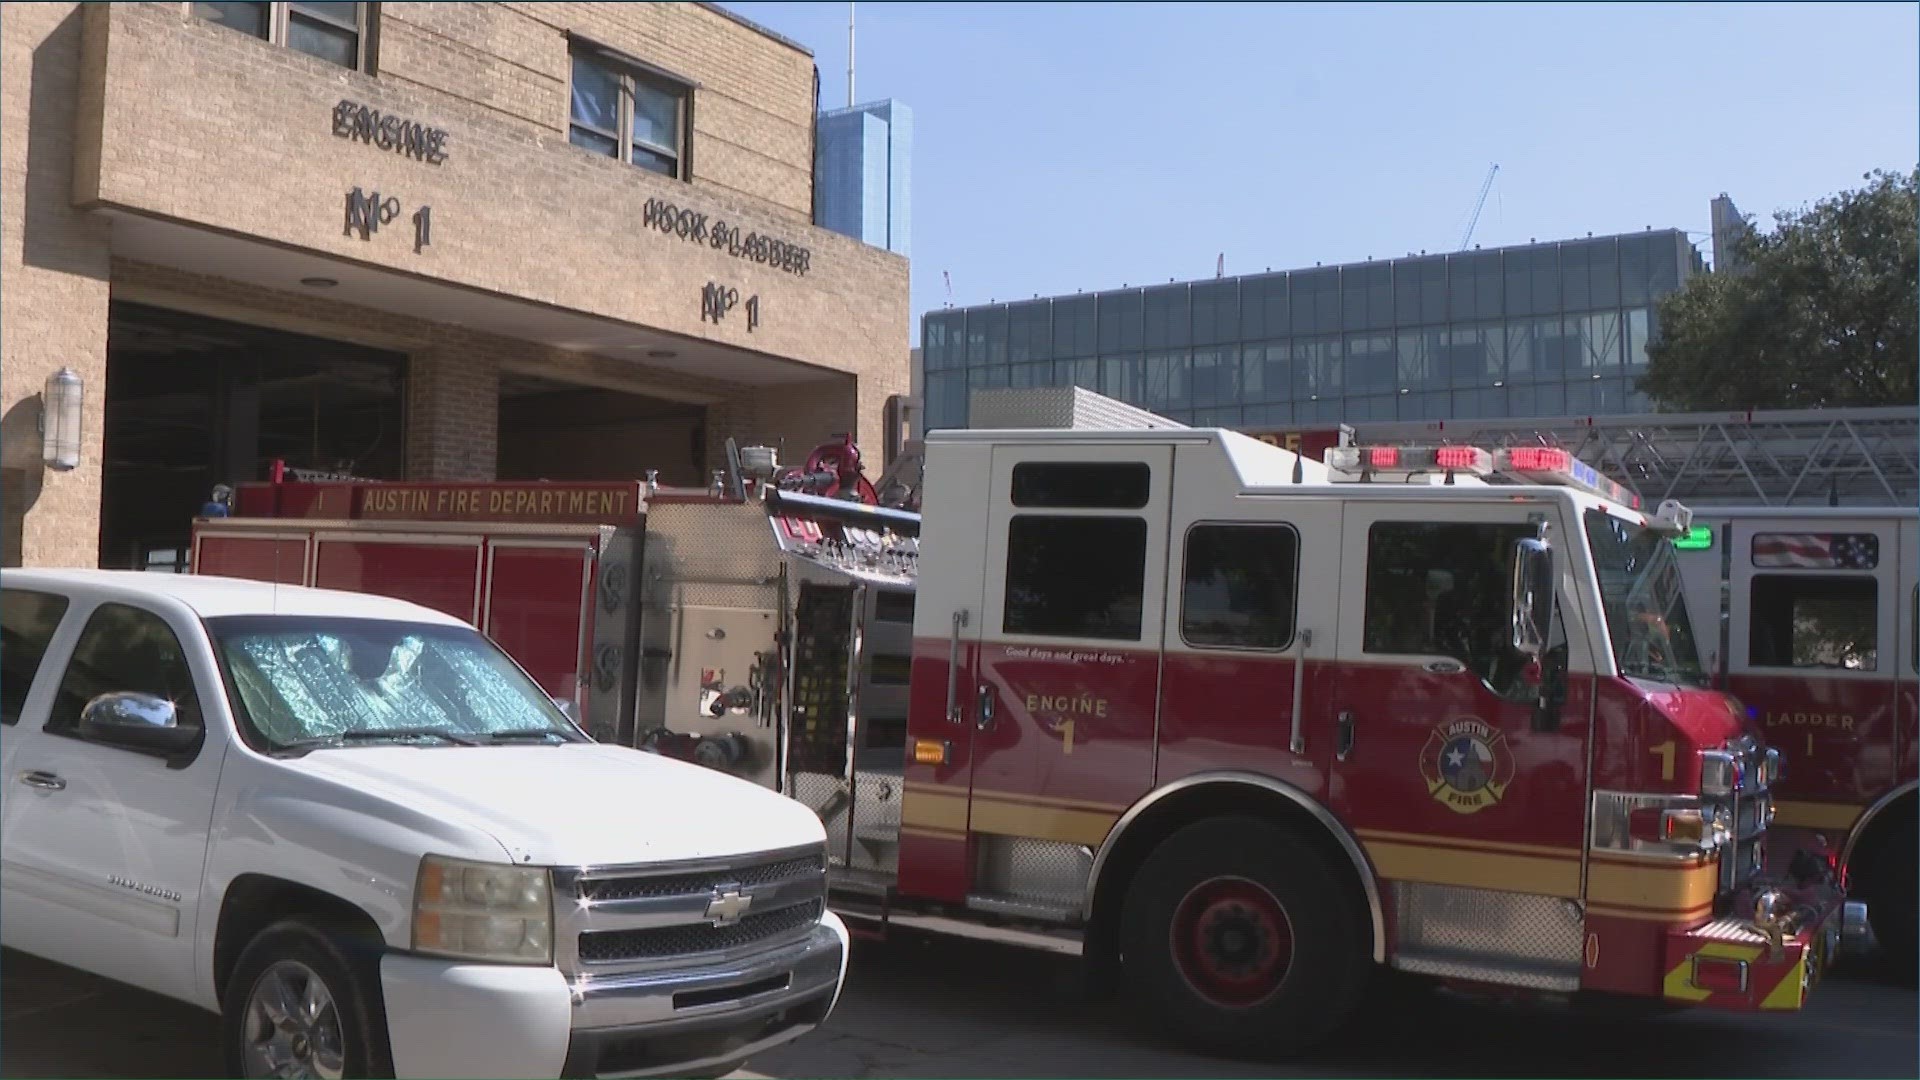 The City of Austin and the firefighters union struck a deal on a new contract. But not everyone is happy with the changes.